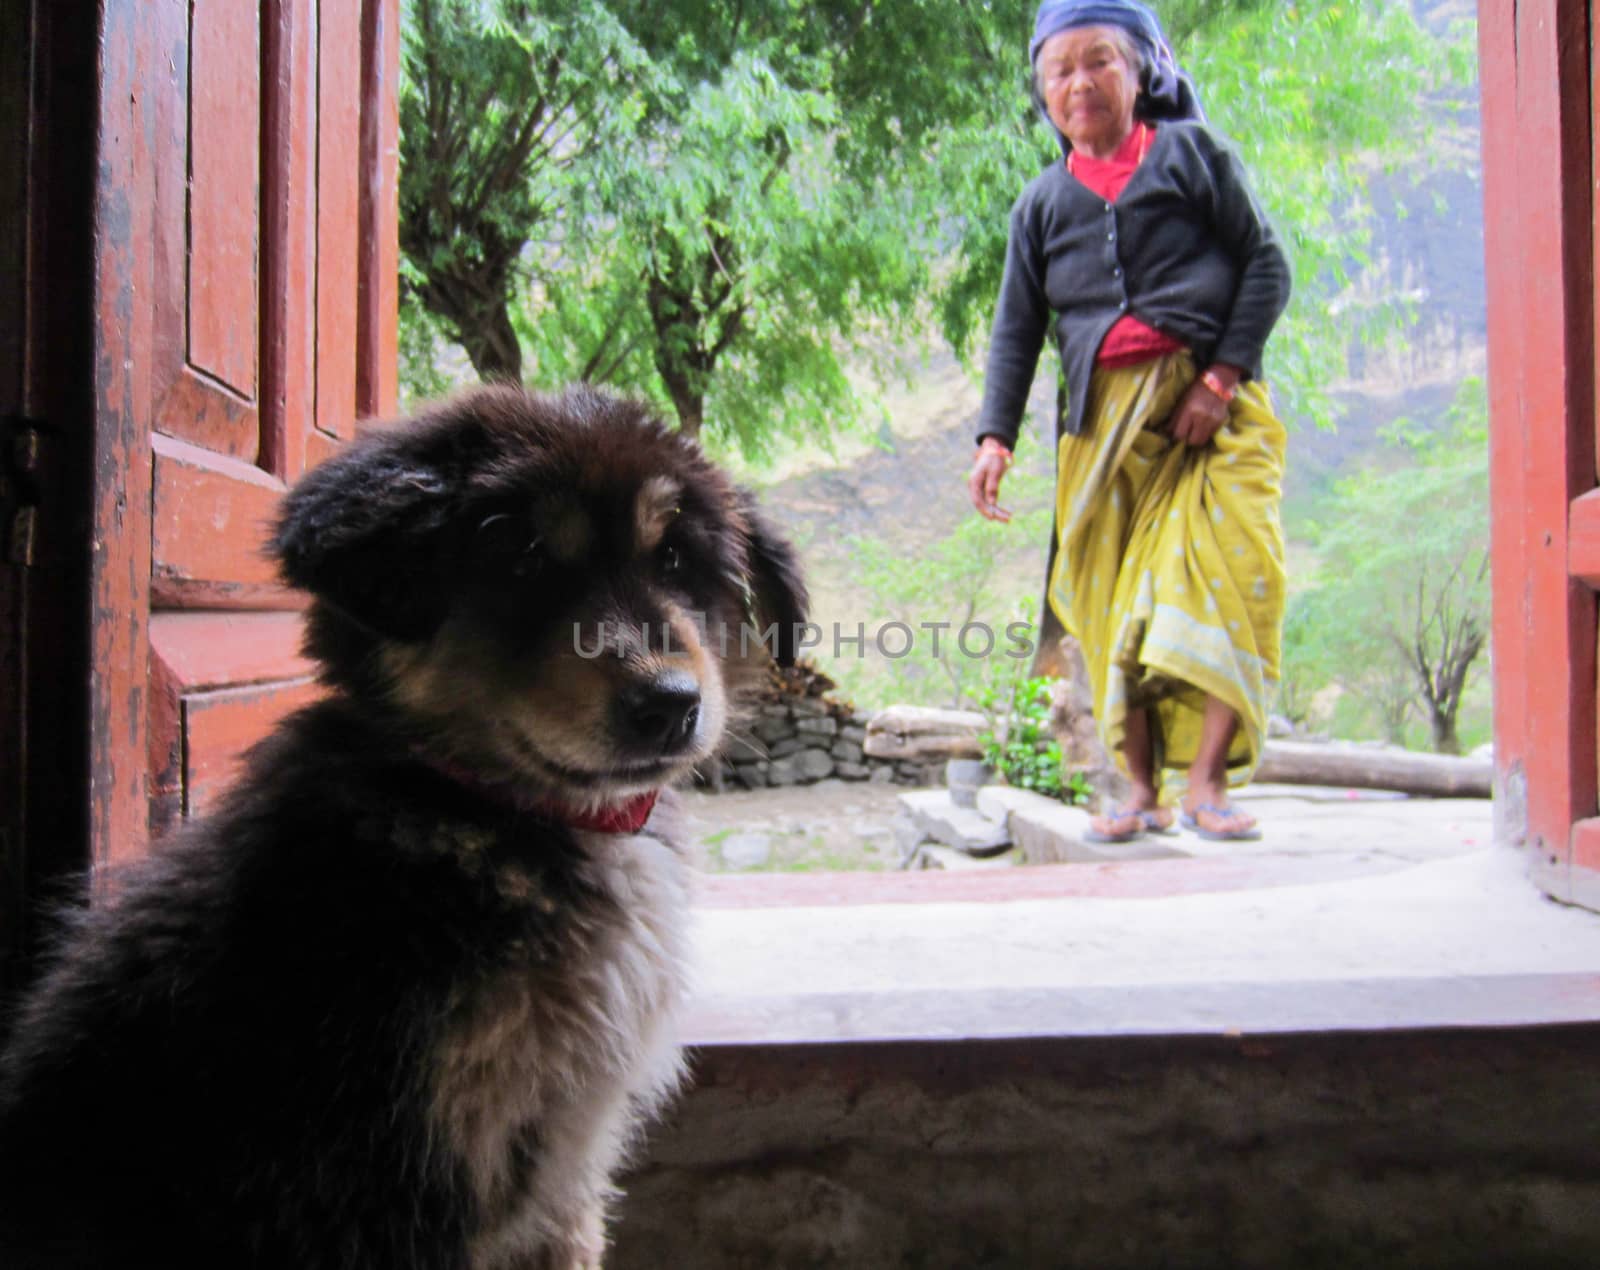 ANNAPURNA, NEPAL - APRIL 28, 2015: Small cute dog puppy is waiting inside a house in front of the open wooden door for his aunt who is approaching from the green garden on a bright day on April 28, 2015 in Annapurna, Nepal.